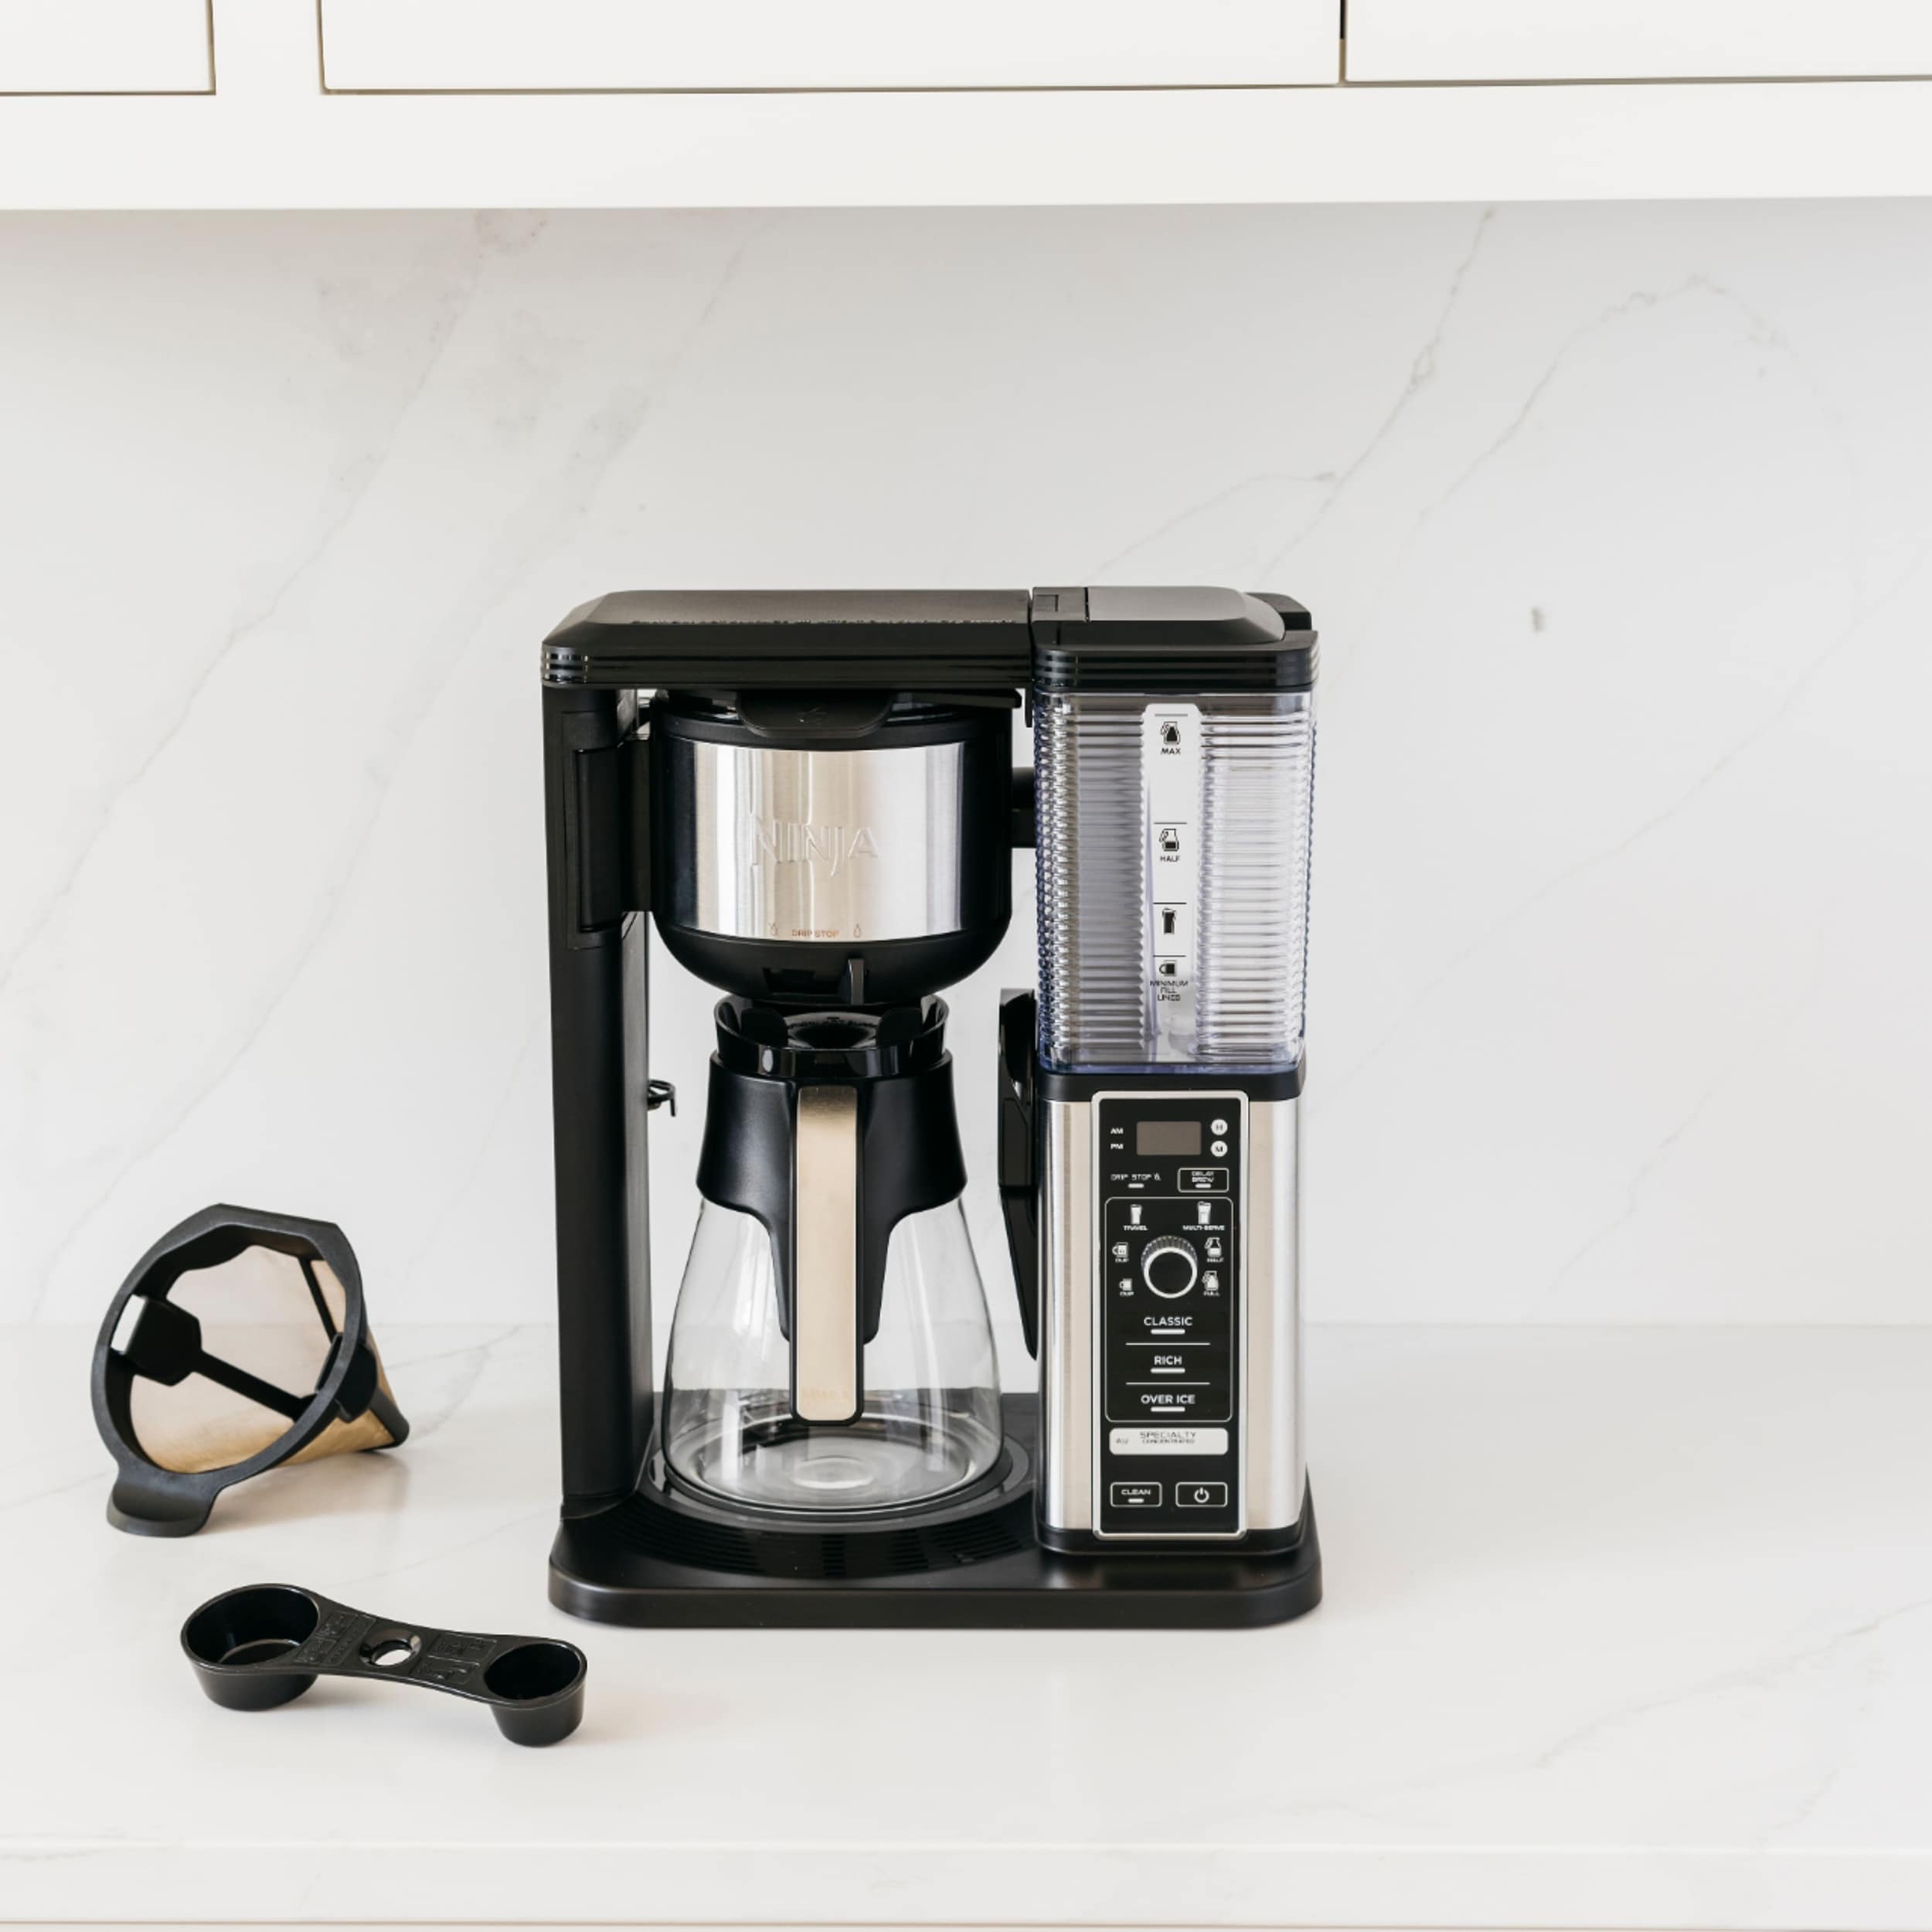 https://ak1.ostkcdn.com/images/products/is/images/direct/e1ef851899a2e92955a1fe2ce4a065baa921800c/Ninja-Specialty-Coffee-Maker-with-Glass-Garage.jpg